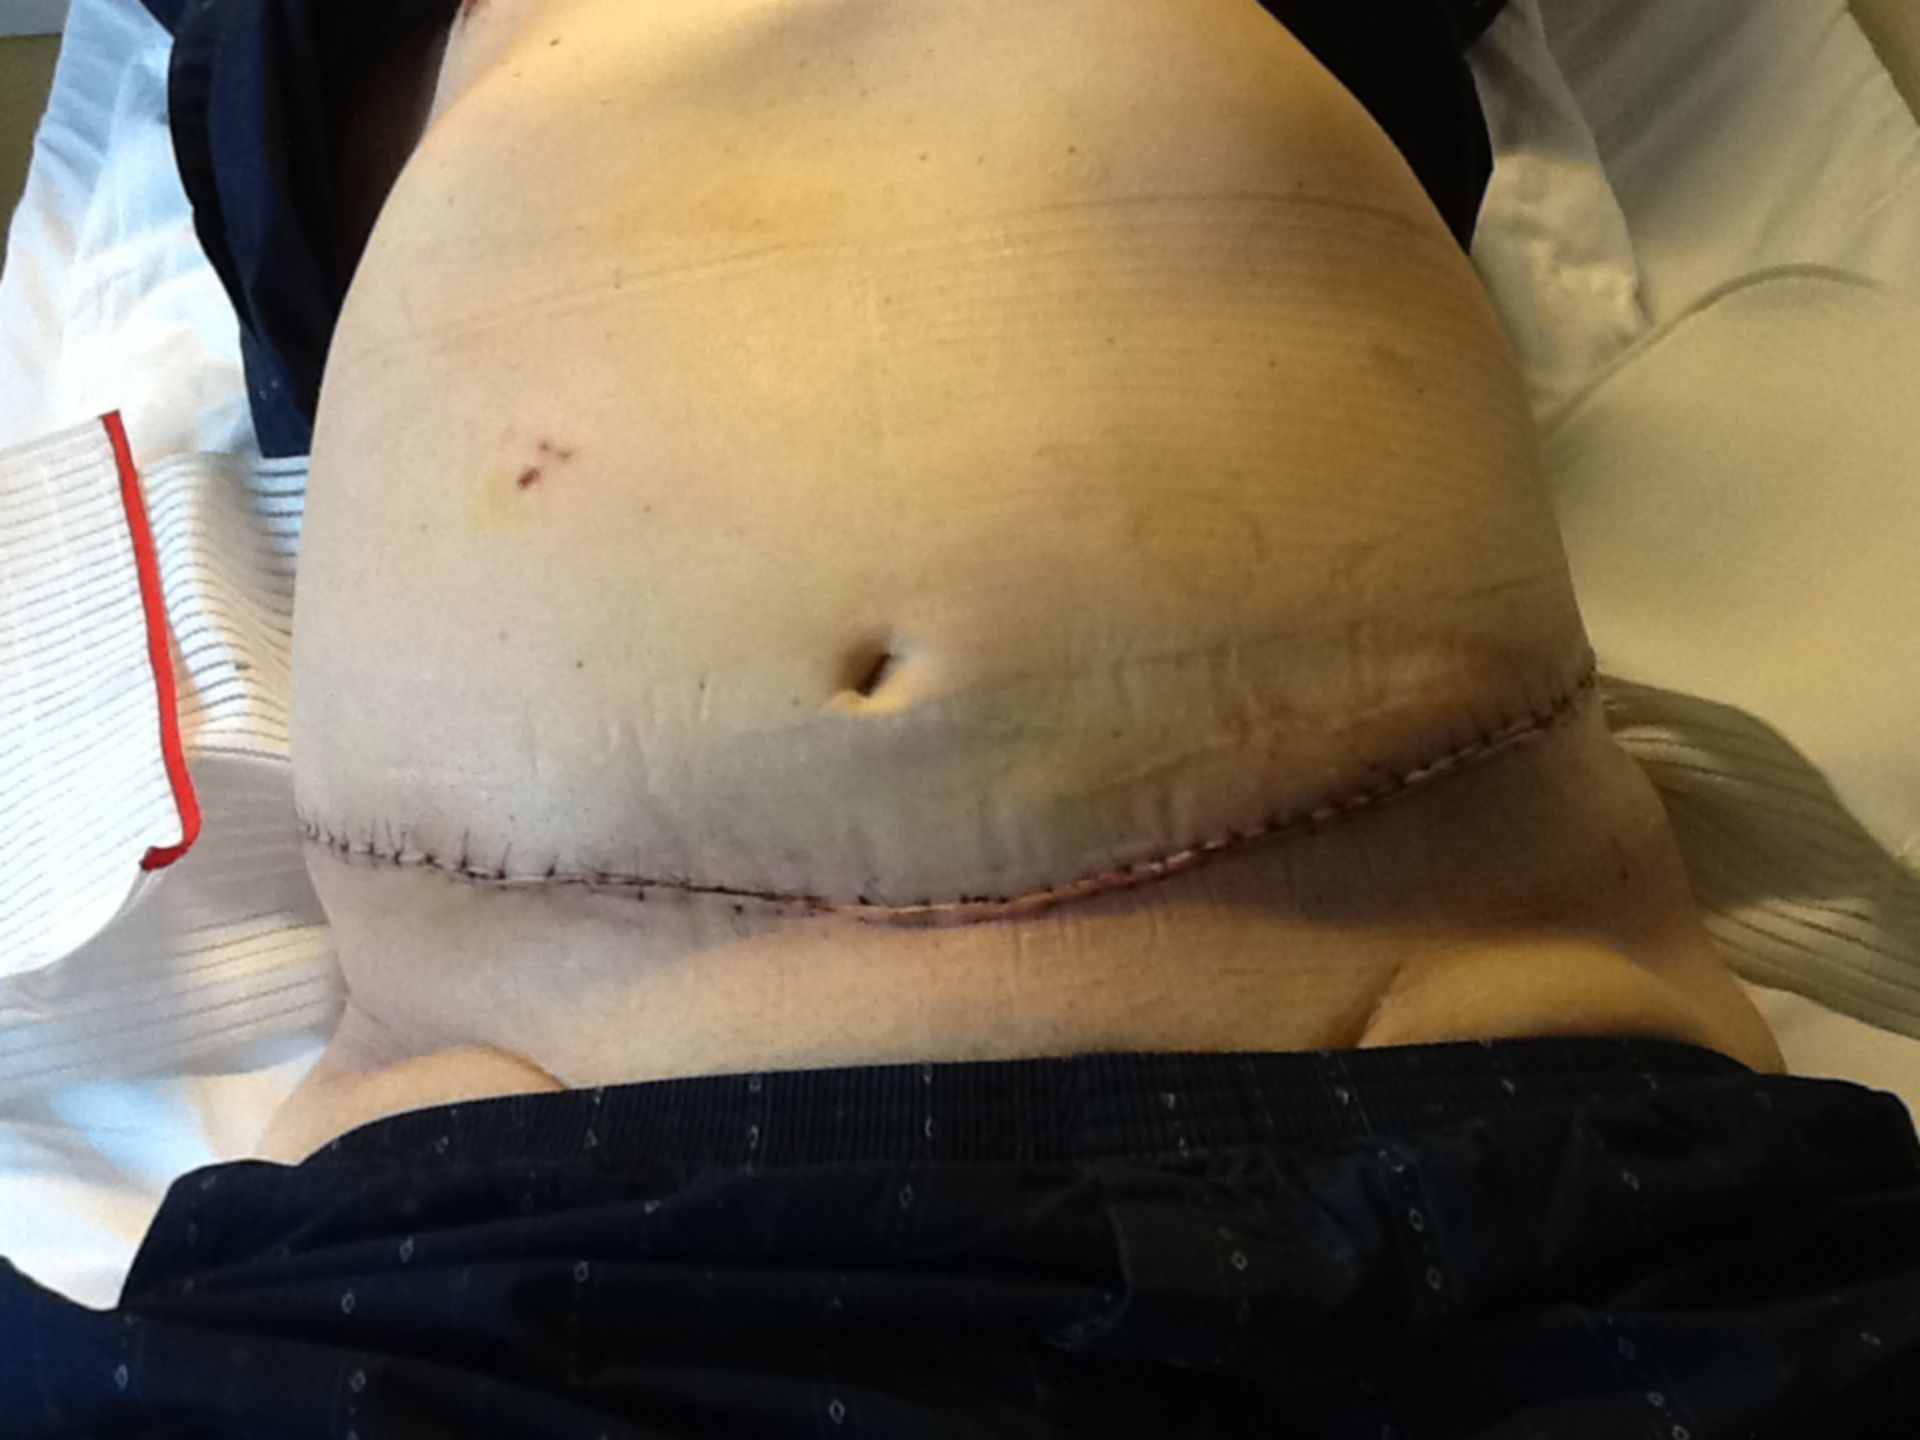 Patient after resection of a fatty apron